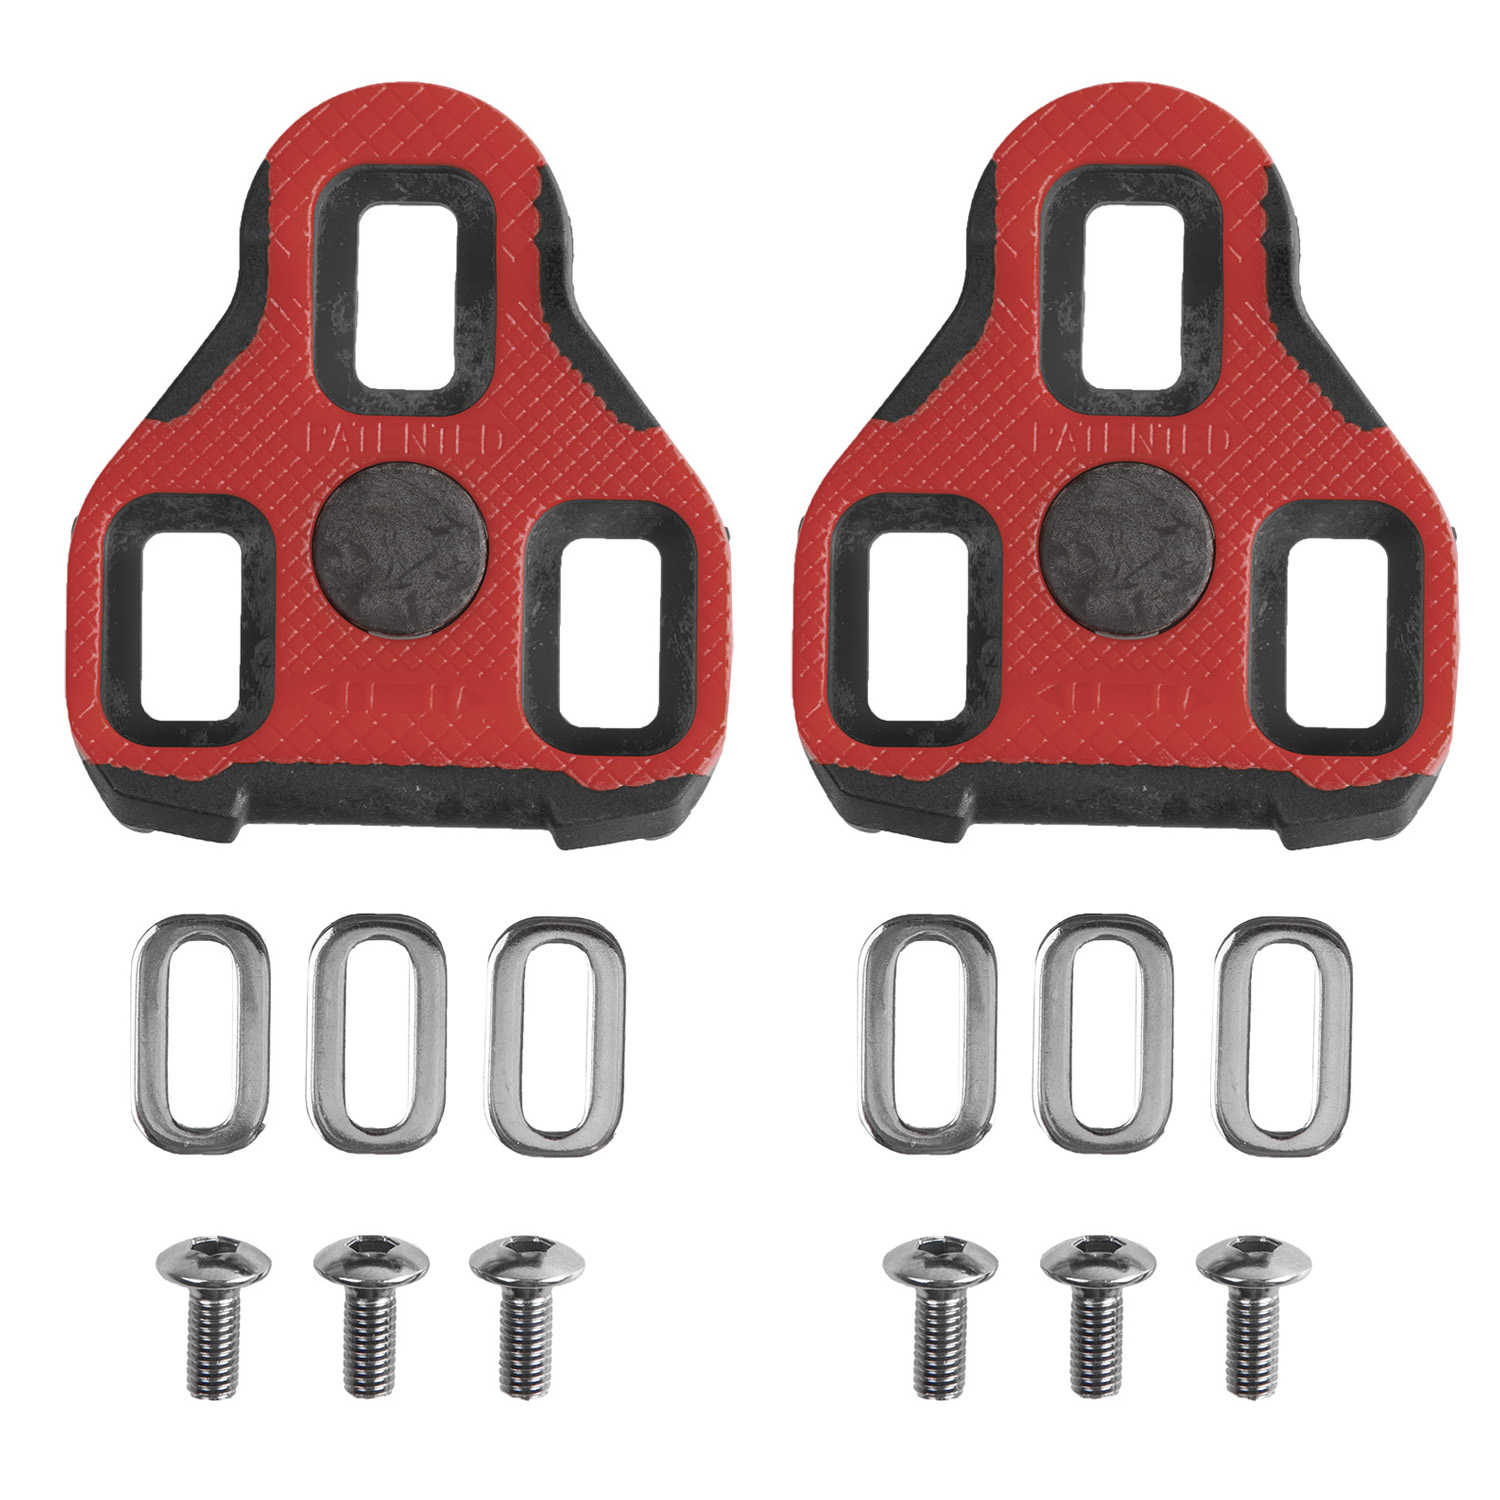 EXUSTAR E-ARC11 cleat set – AVAILABLE IN SELECTED BIKE SHOPS